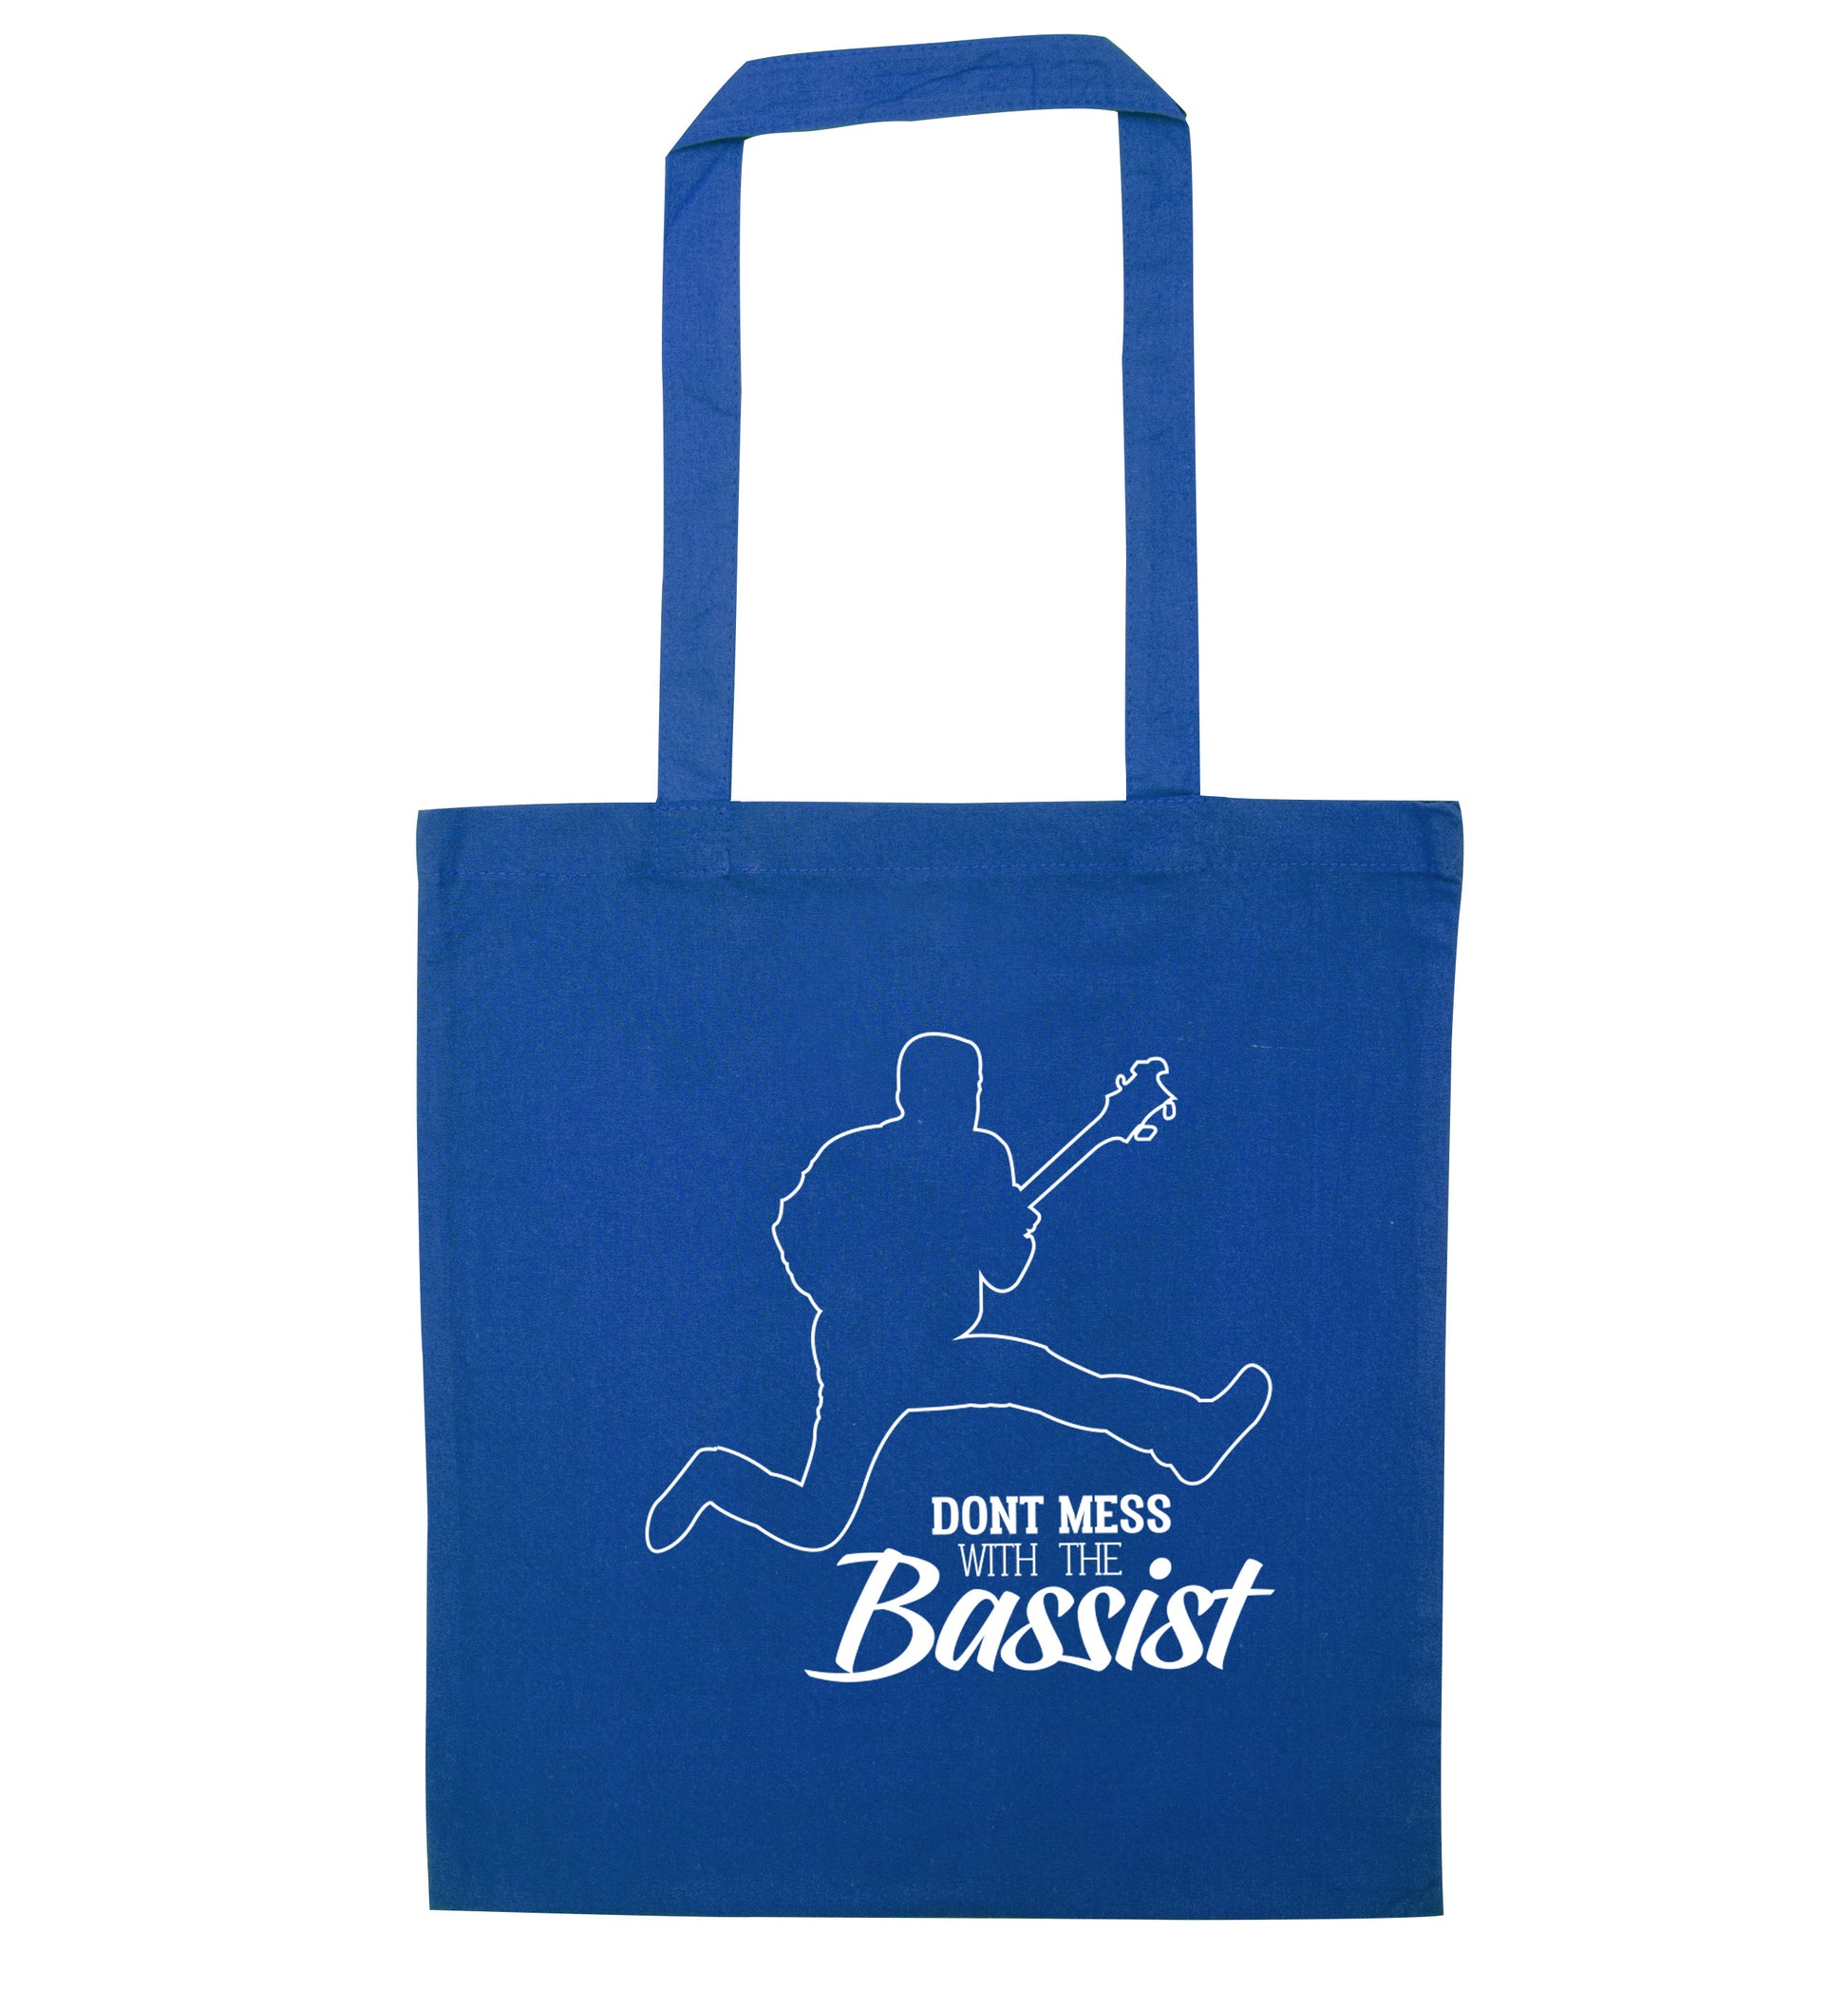 Dont mess with the bassist blue tote bag